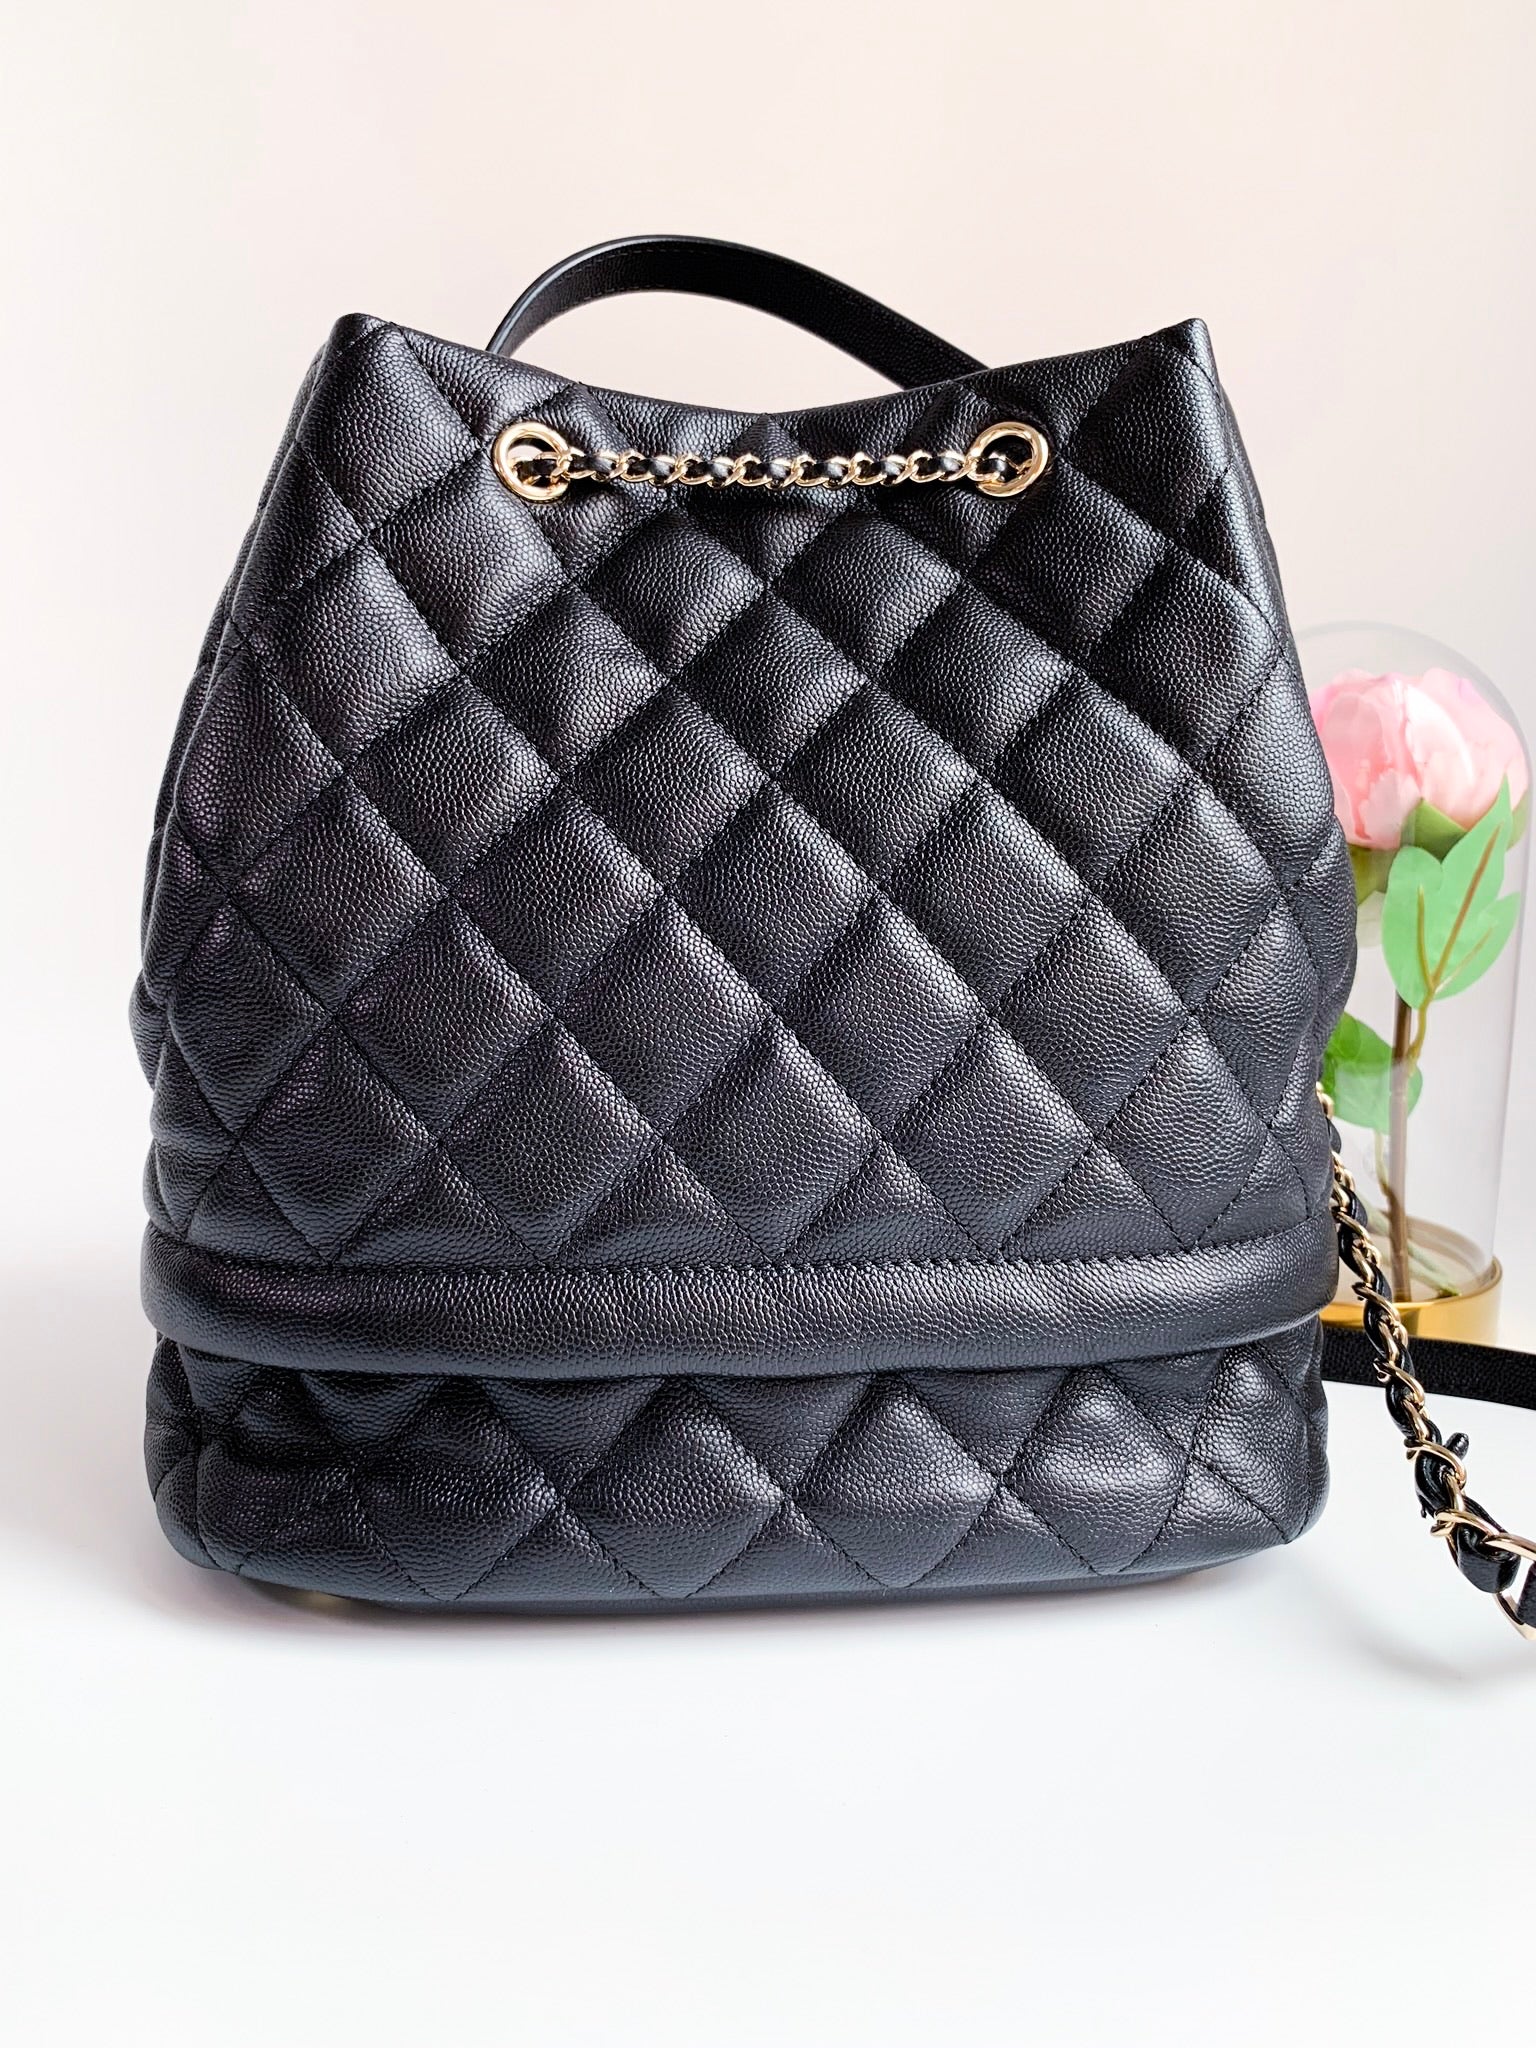 CHANEL Caviar Quilted Small CC Bucket Bag Black 612208